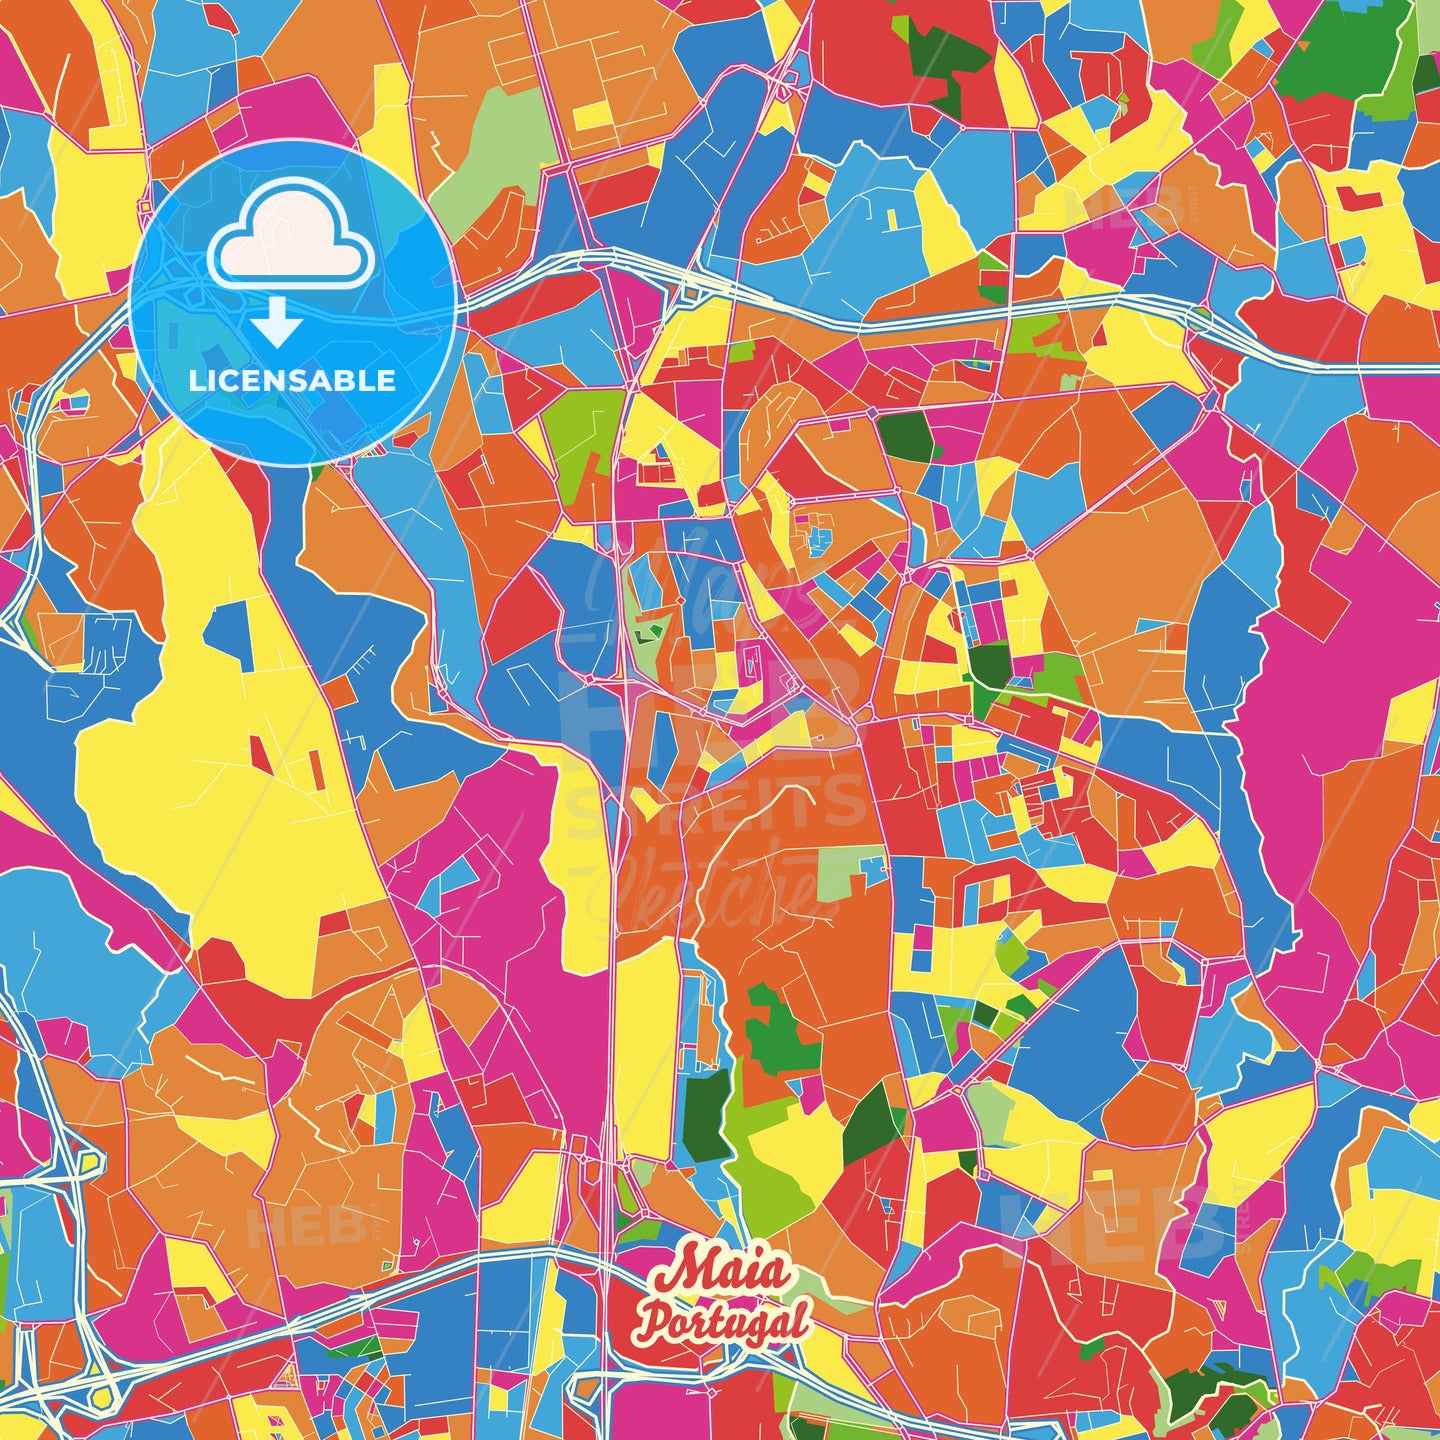 Maia, Portugal Crazy Colorful Street Map Poster Template - HEBSTREITS Sketches